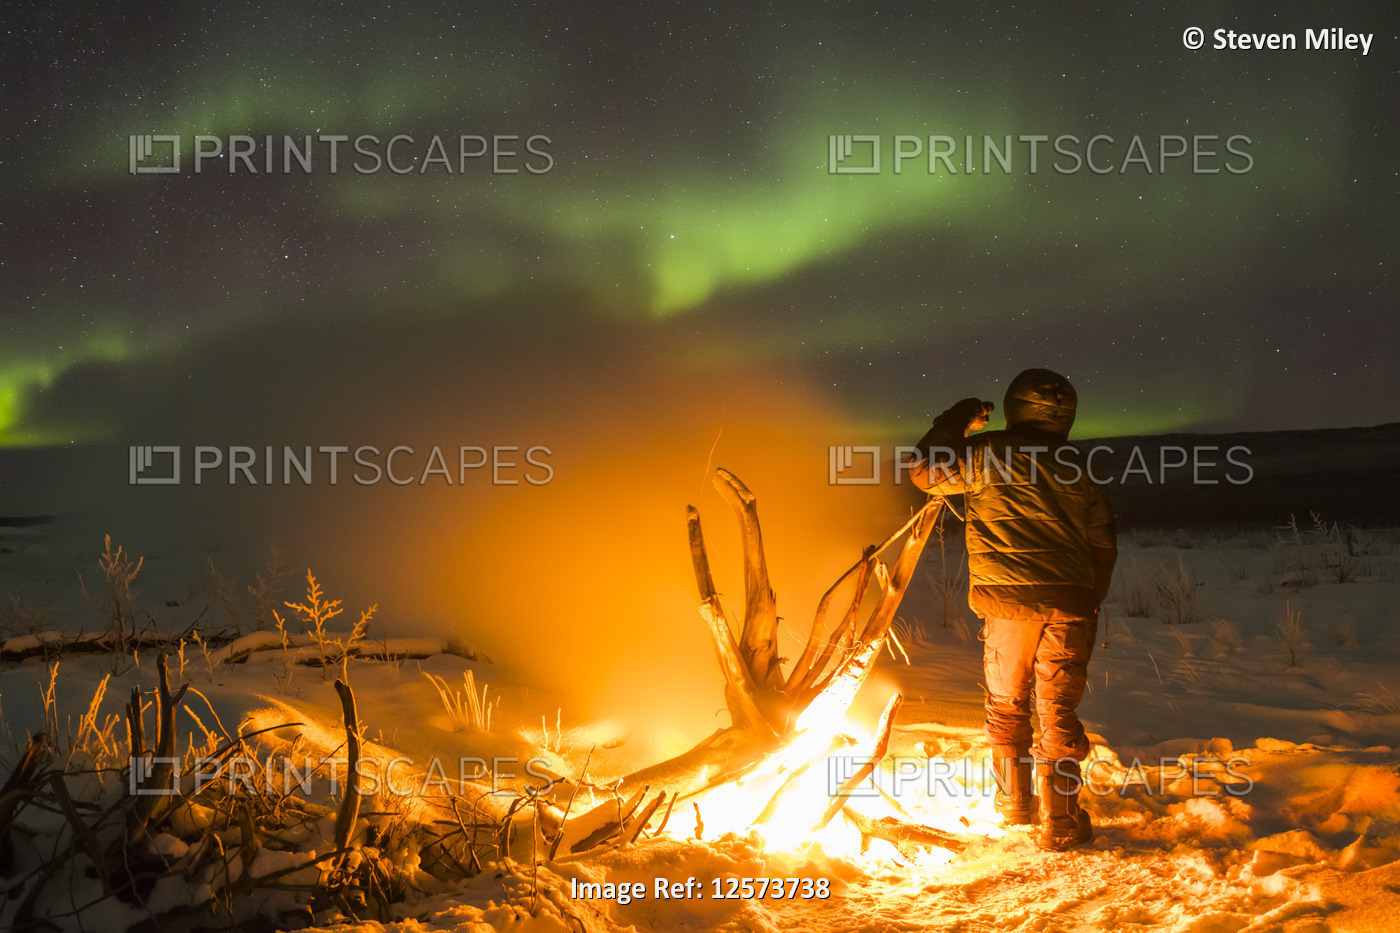 Staying warm beside a campfire on the Delta River while watching the aurora ...